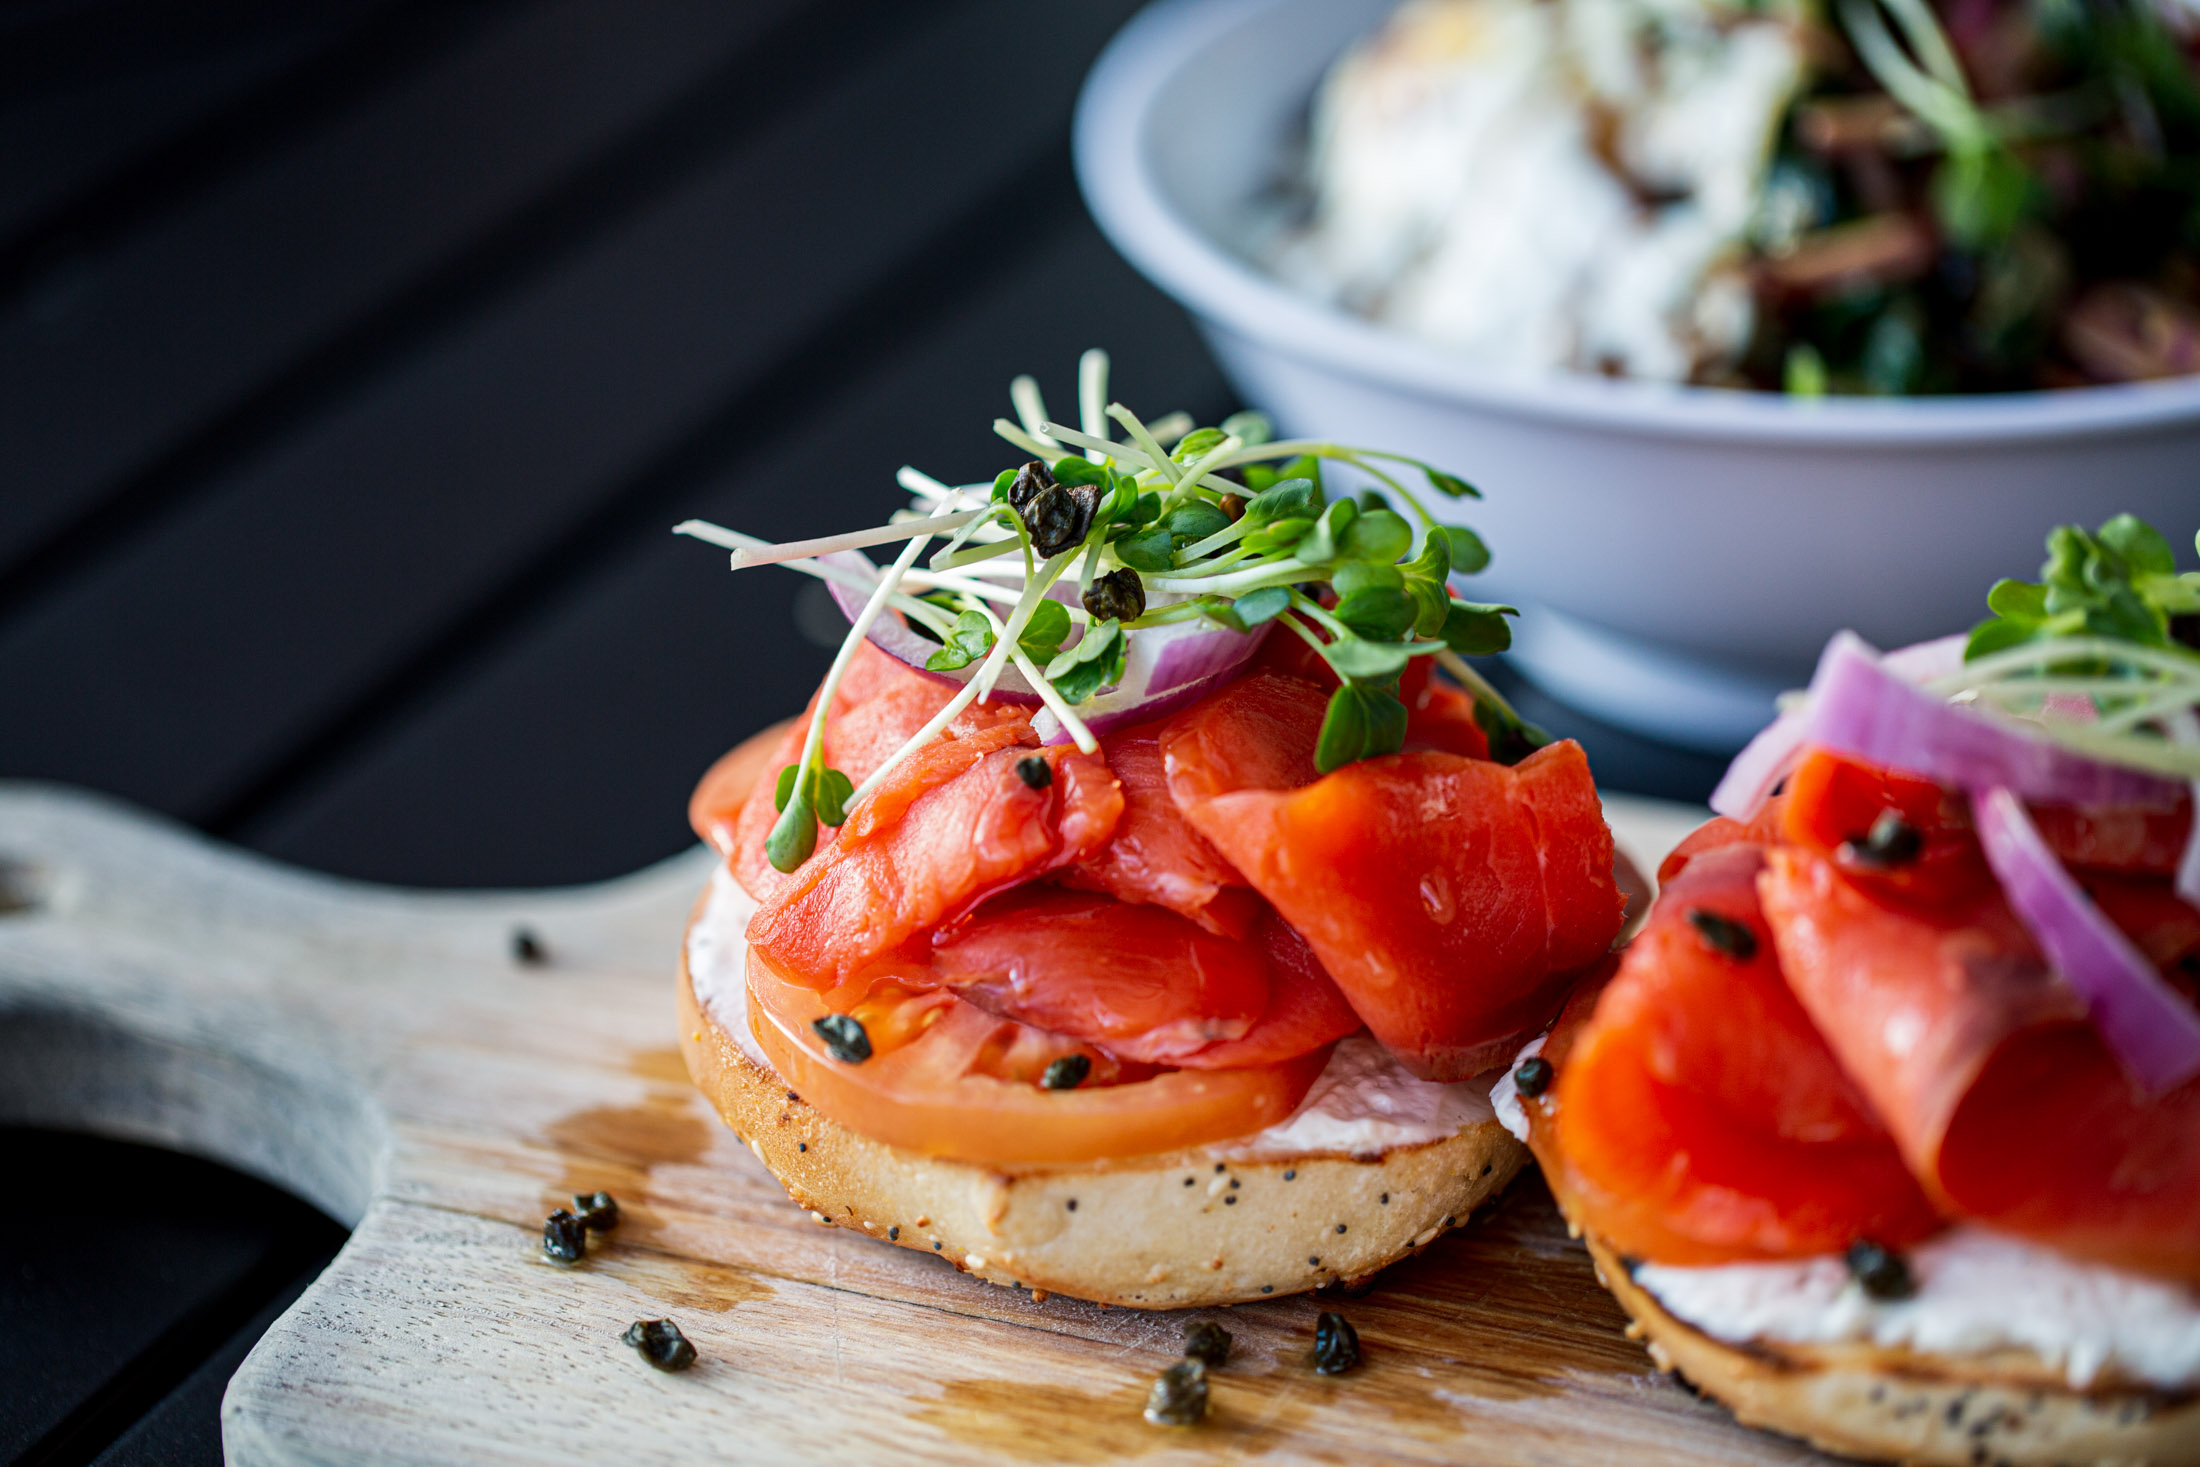 Lox and bagels at Mugs Coffee in Fort Collins, Colorado - John Robson Photography